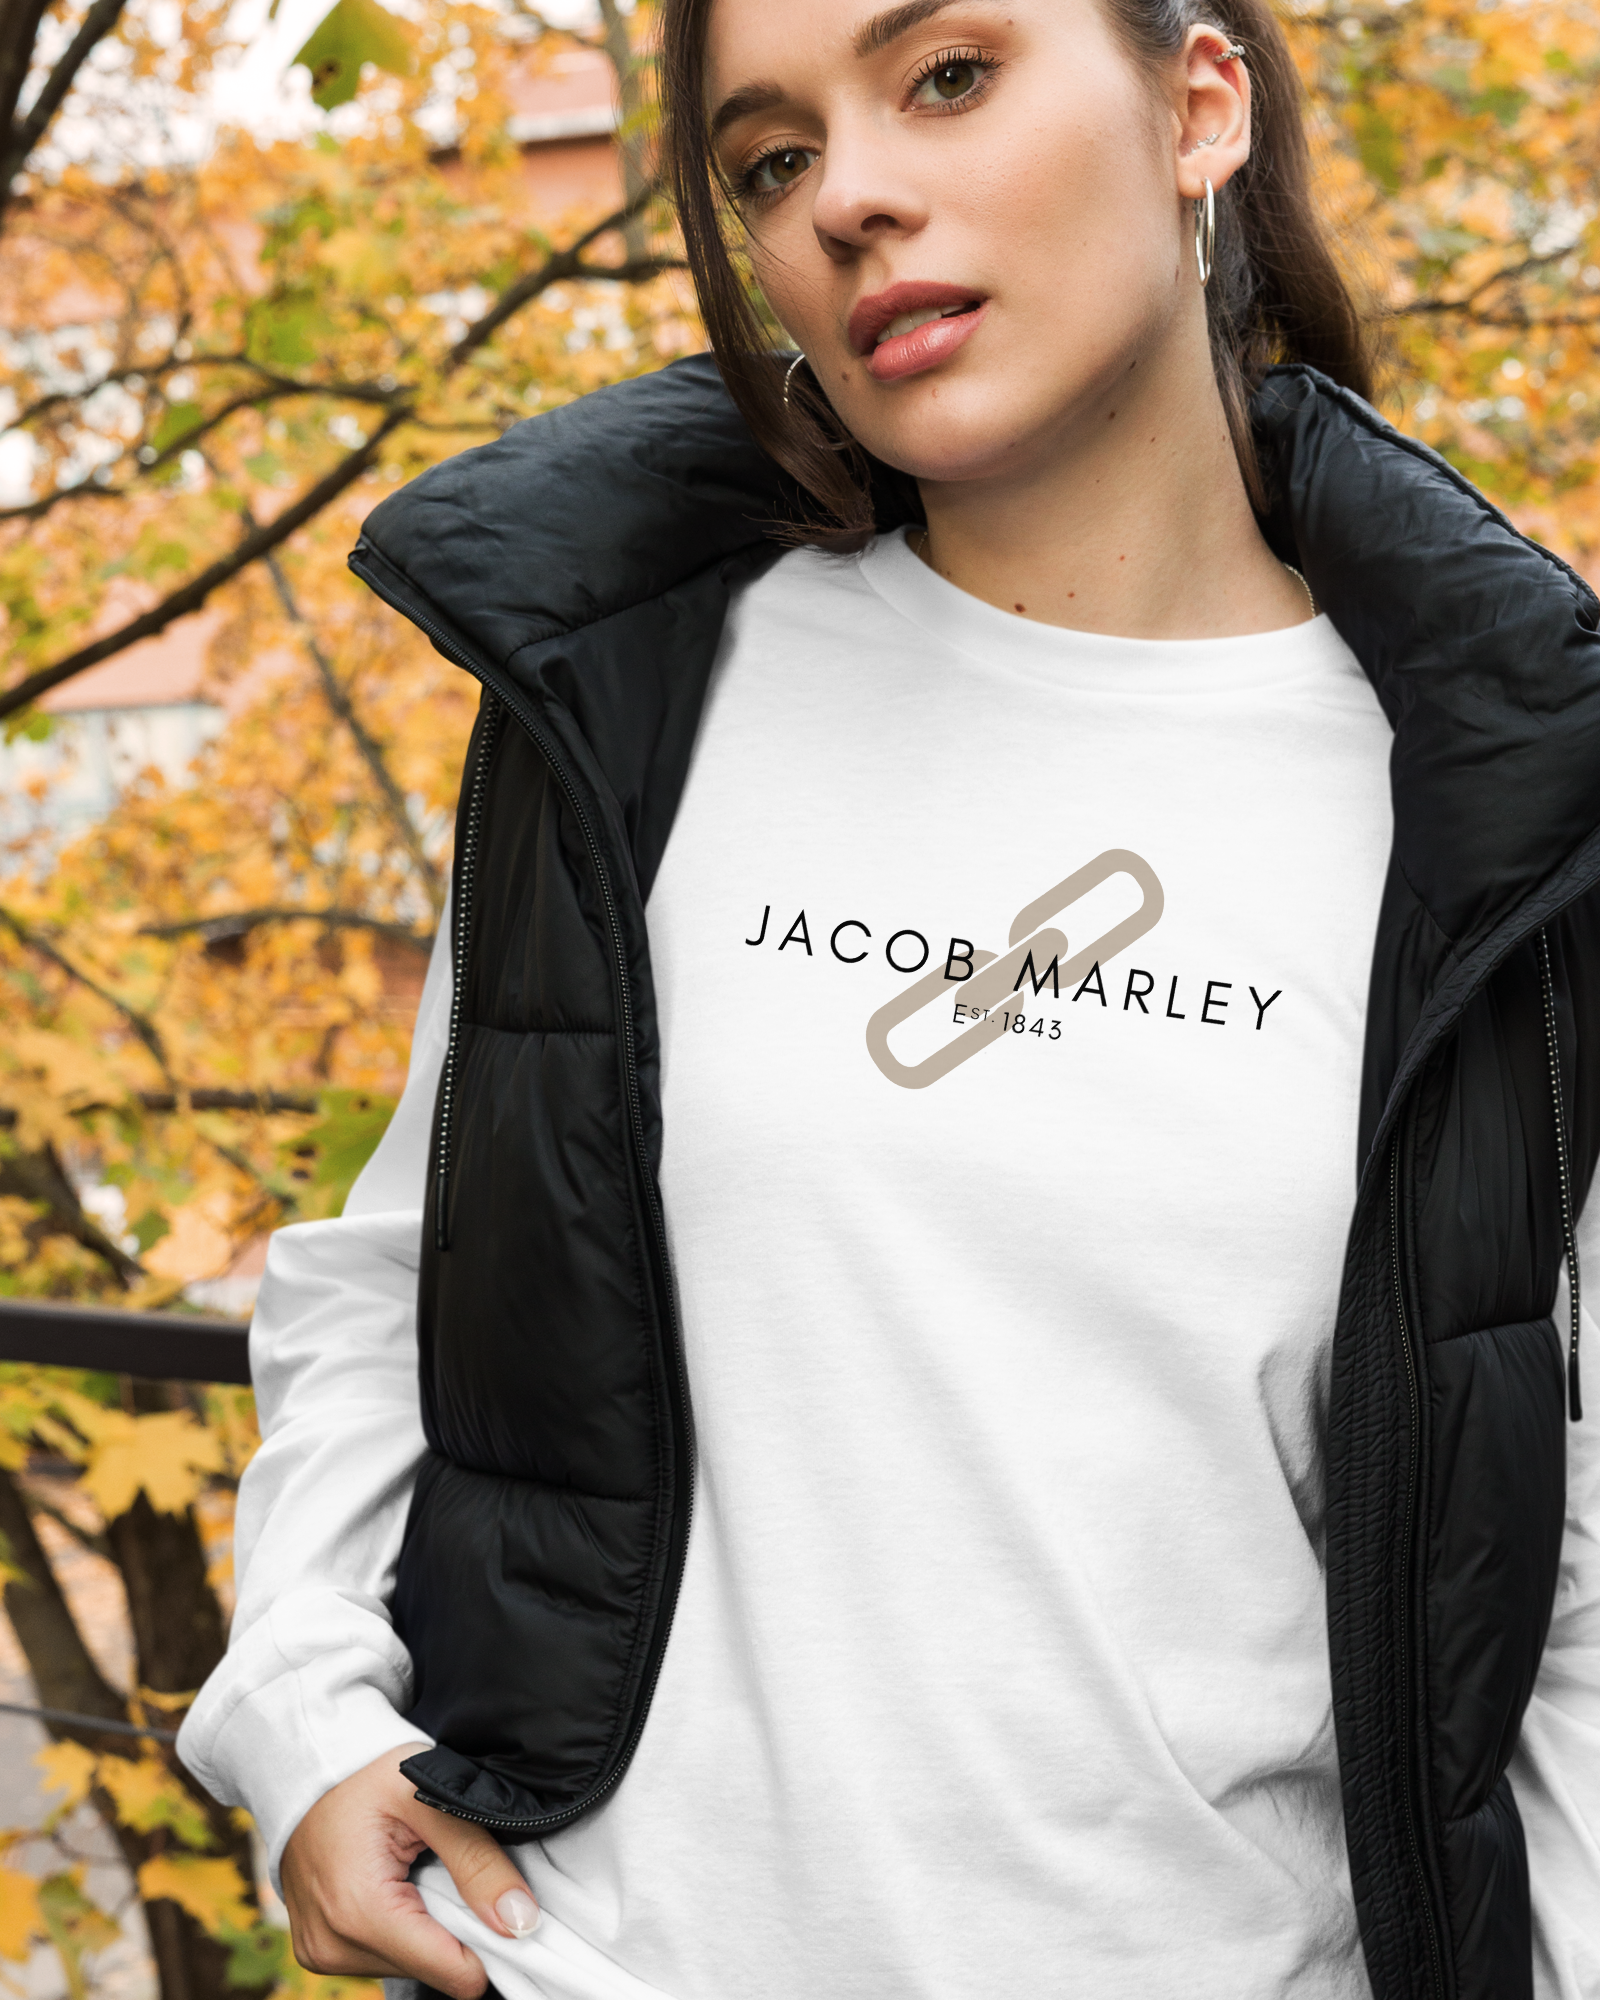 Celebrate the life and legacy of Jacob Marley, the fashion icon whose pioneering chain style was centuries ahead of its time. These Jacob Marley items make fun & stylish gifts for fans of Charles Dickens.